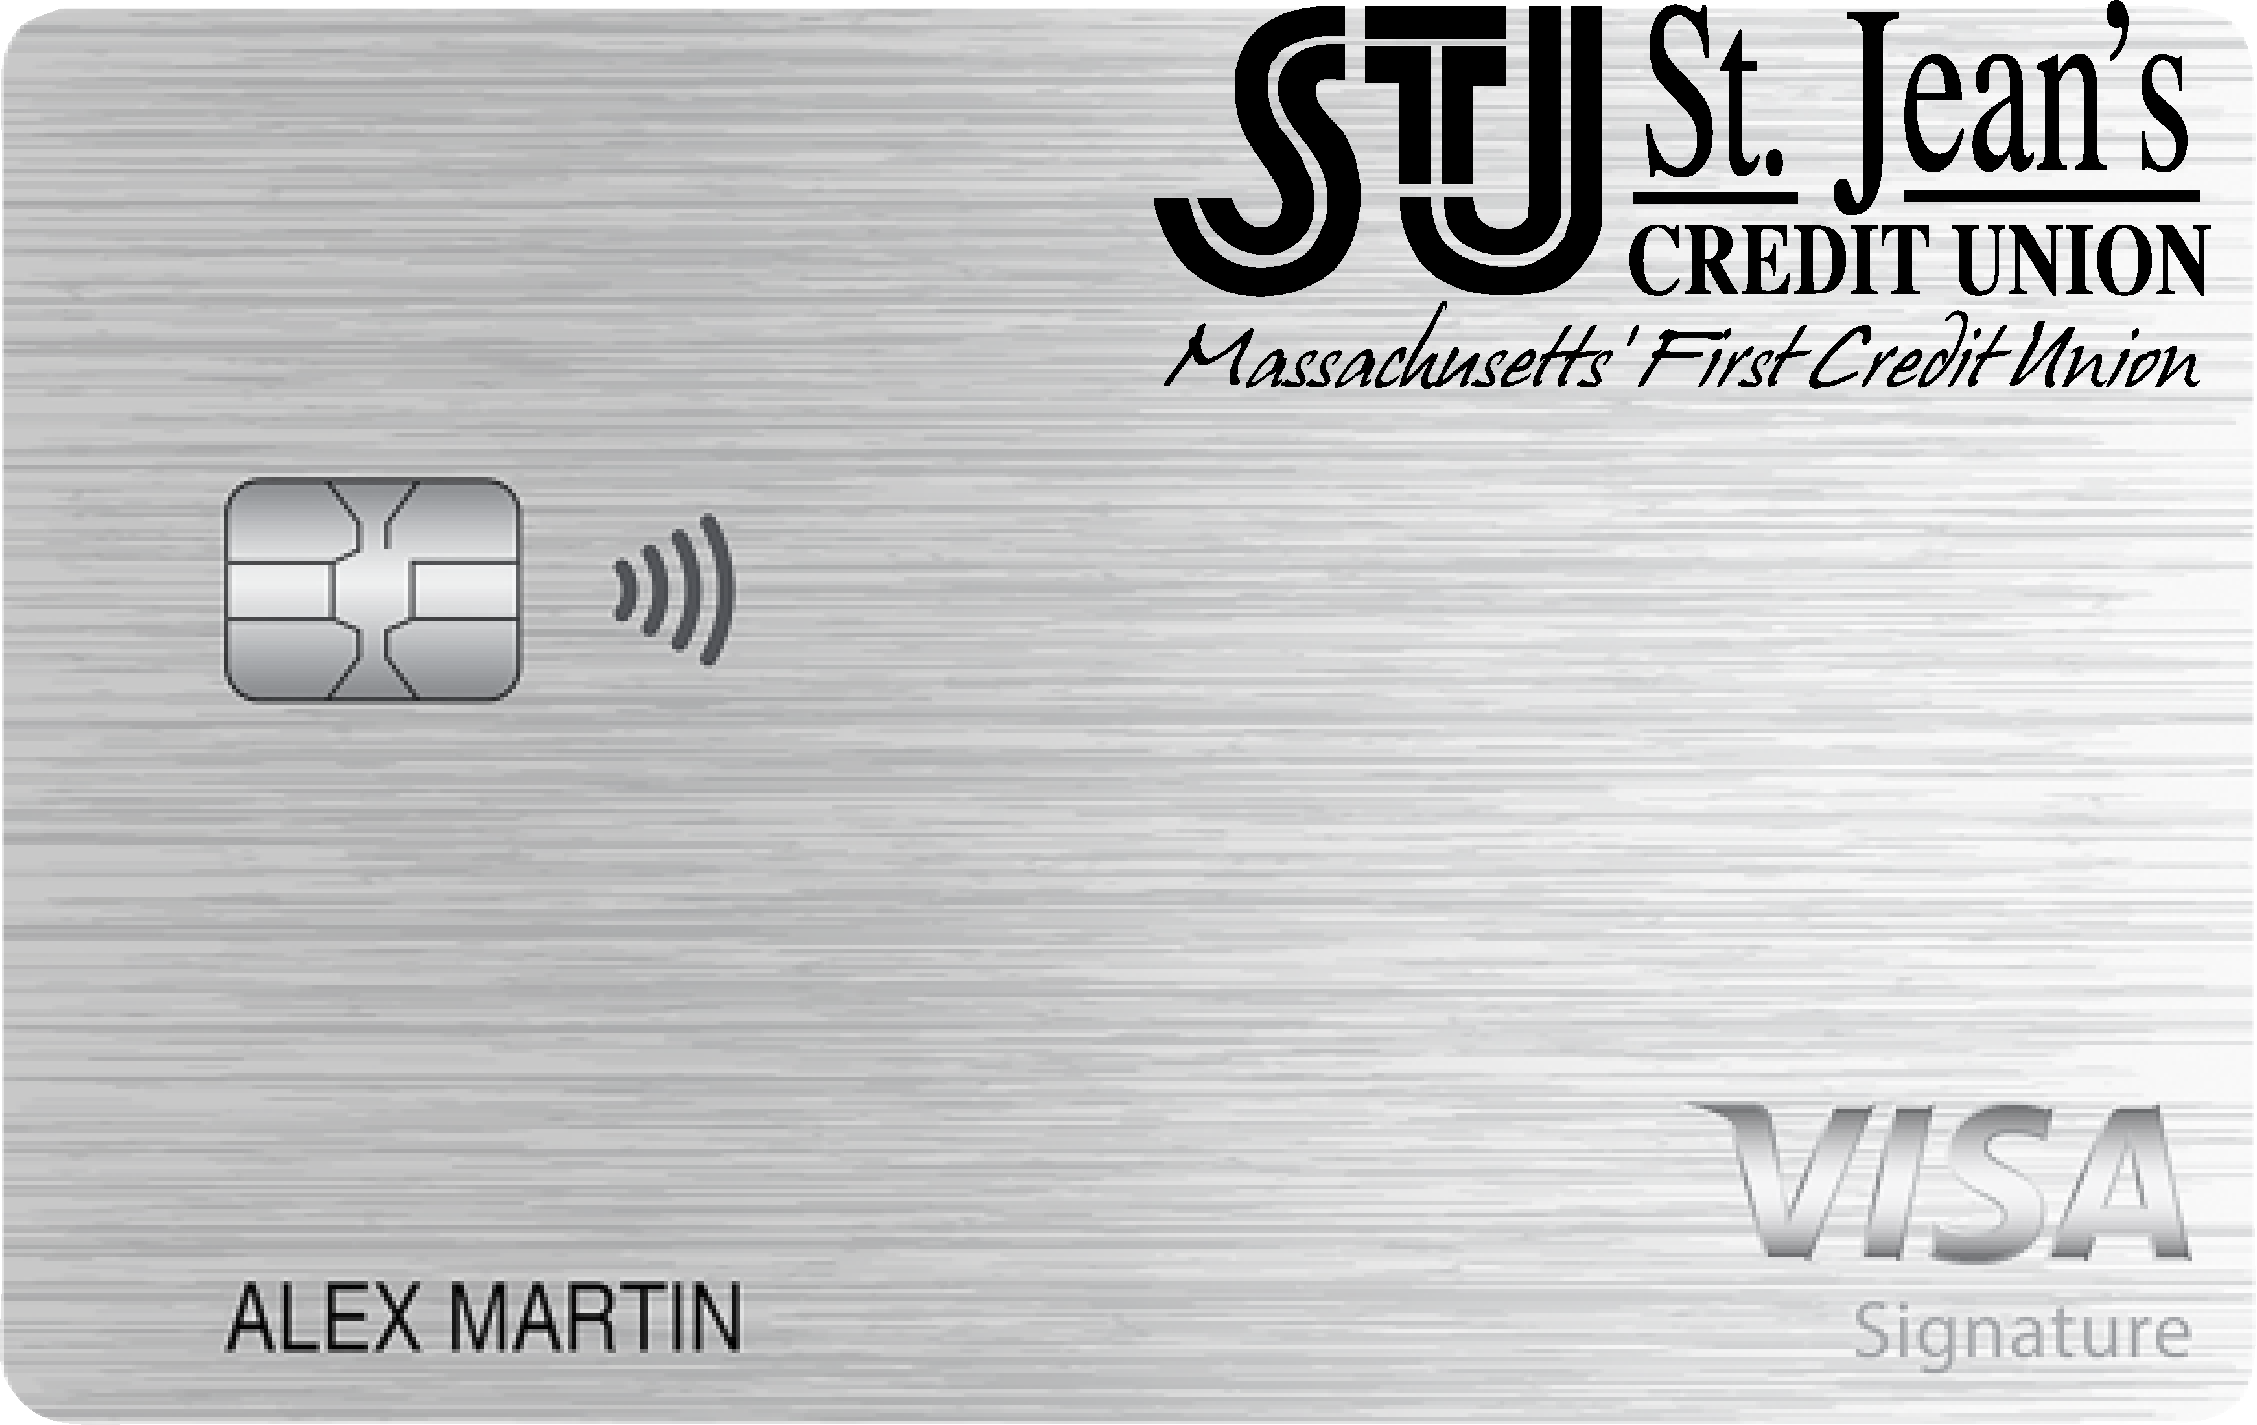 St. Jean's Credit Union College Real Rewards Card